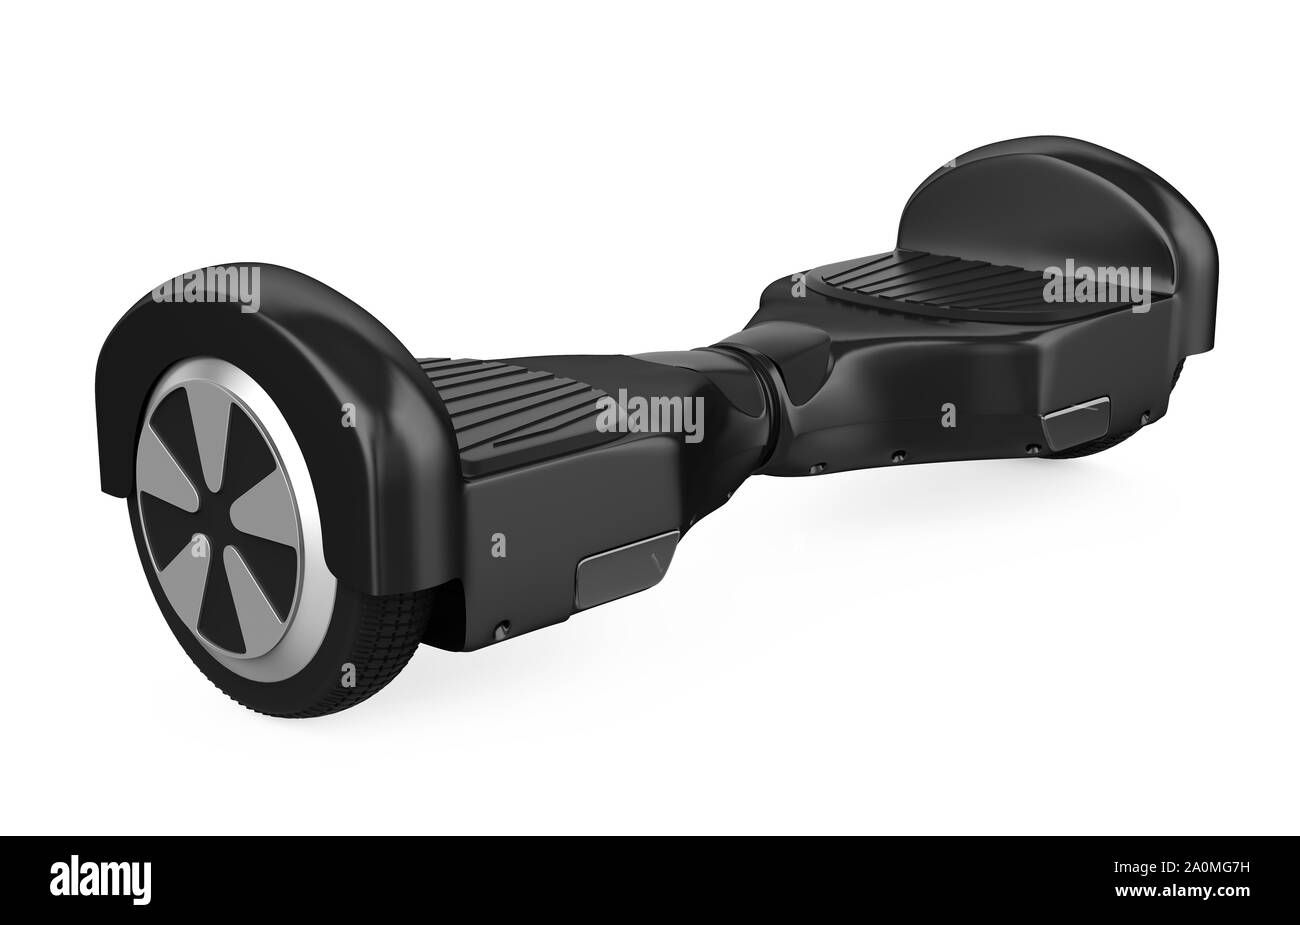 Hoverboard Self Balancing Scooter Isolated Stock Photo